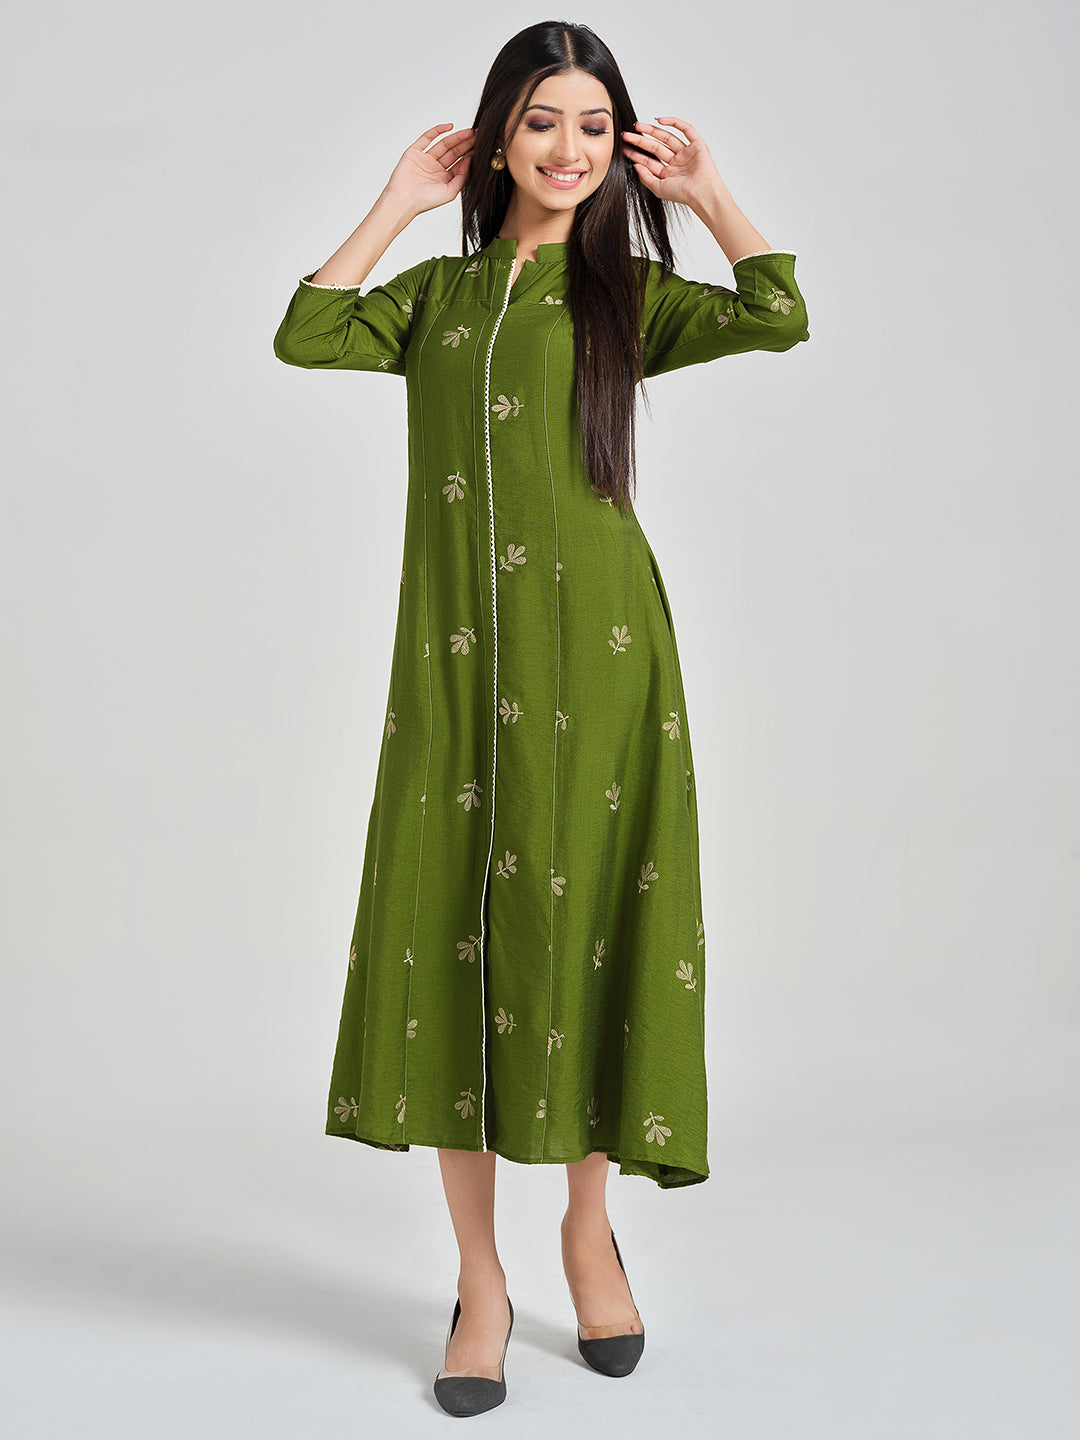 Green Embroidered A-Line Dress - ARH1264